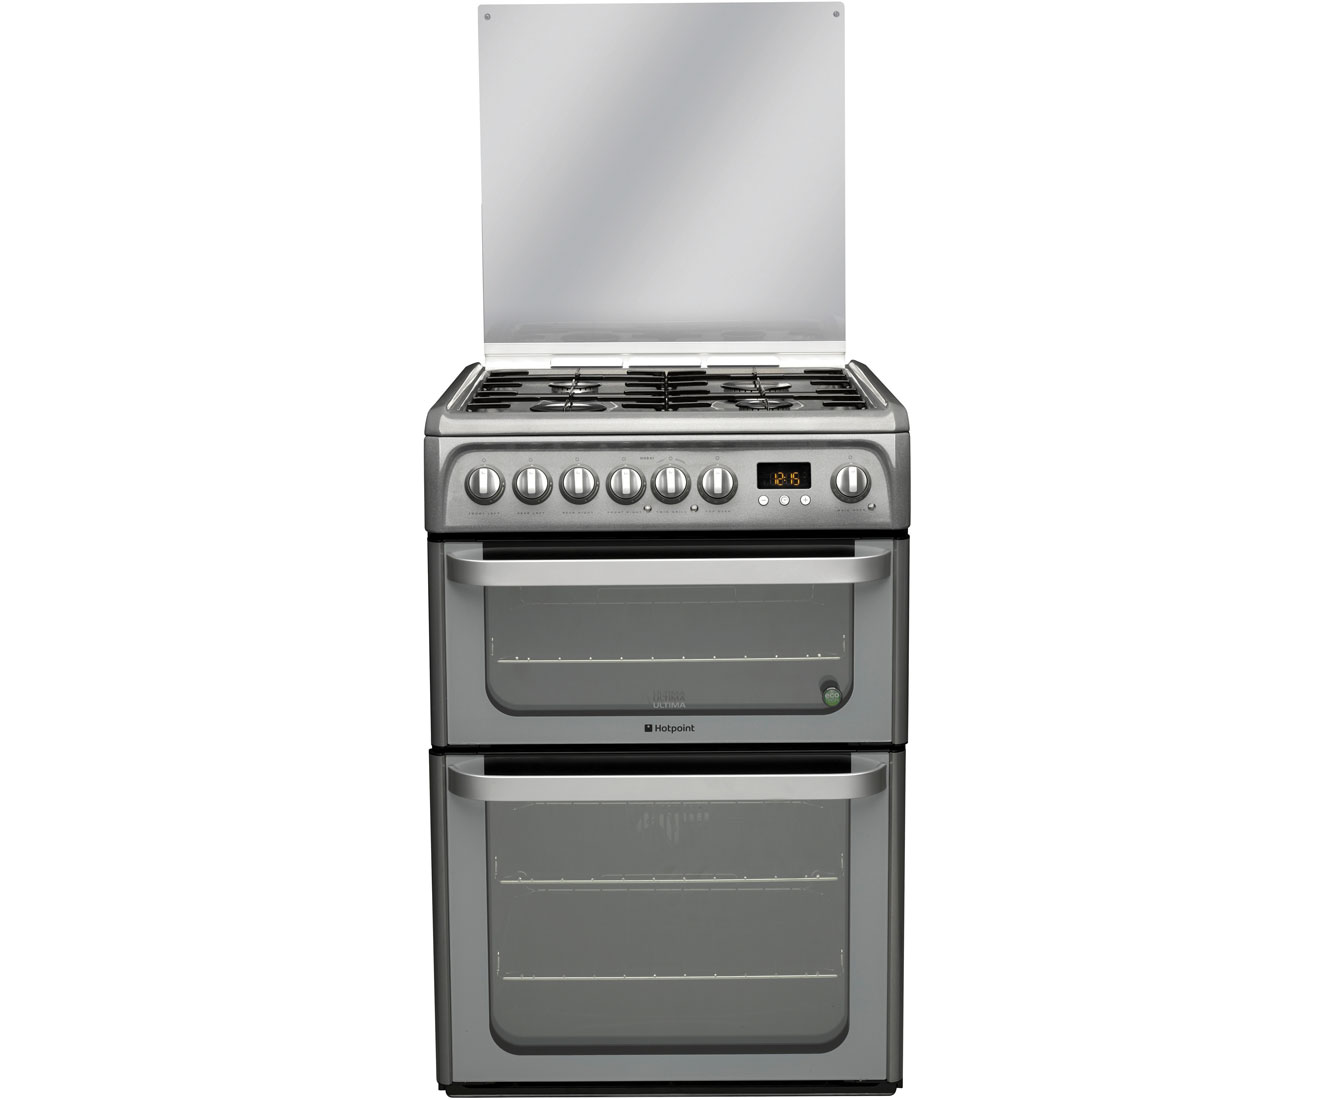 Hotpoint Ultima HUD61GS Dual Fuel Cooker Review